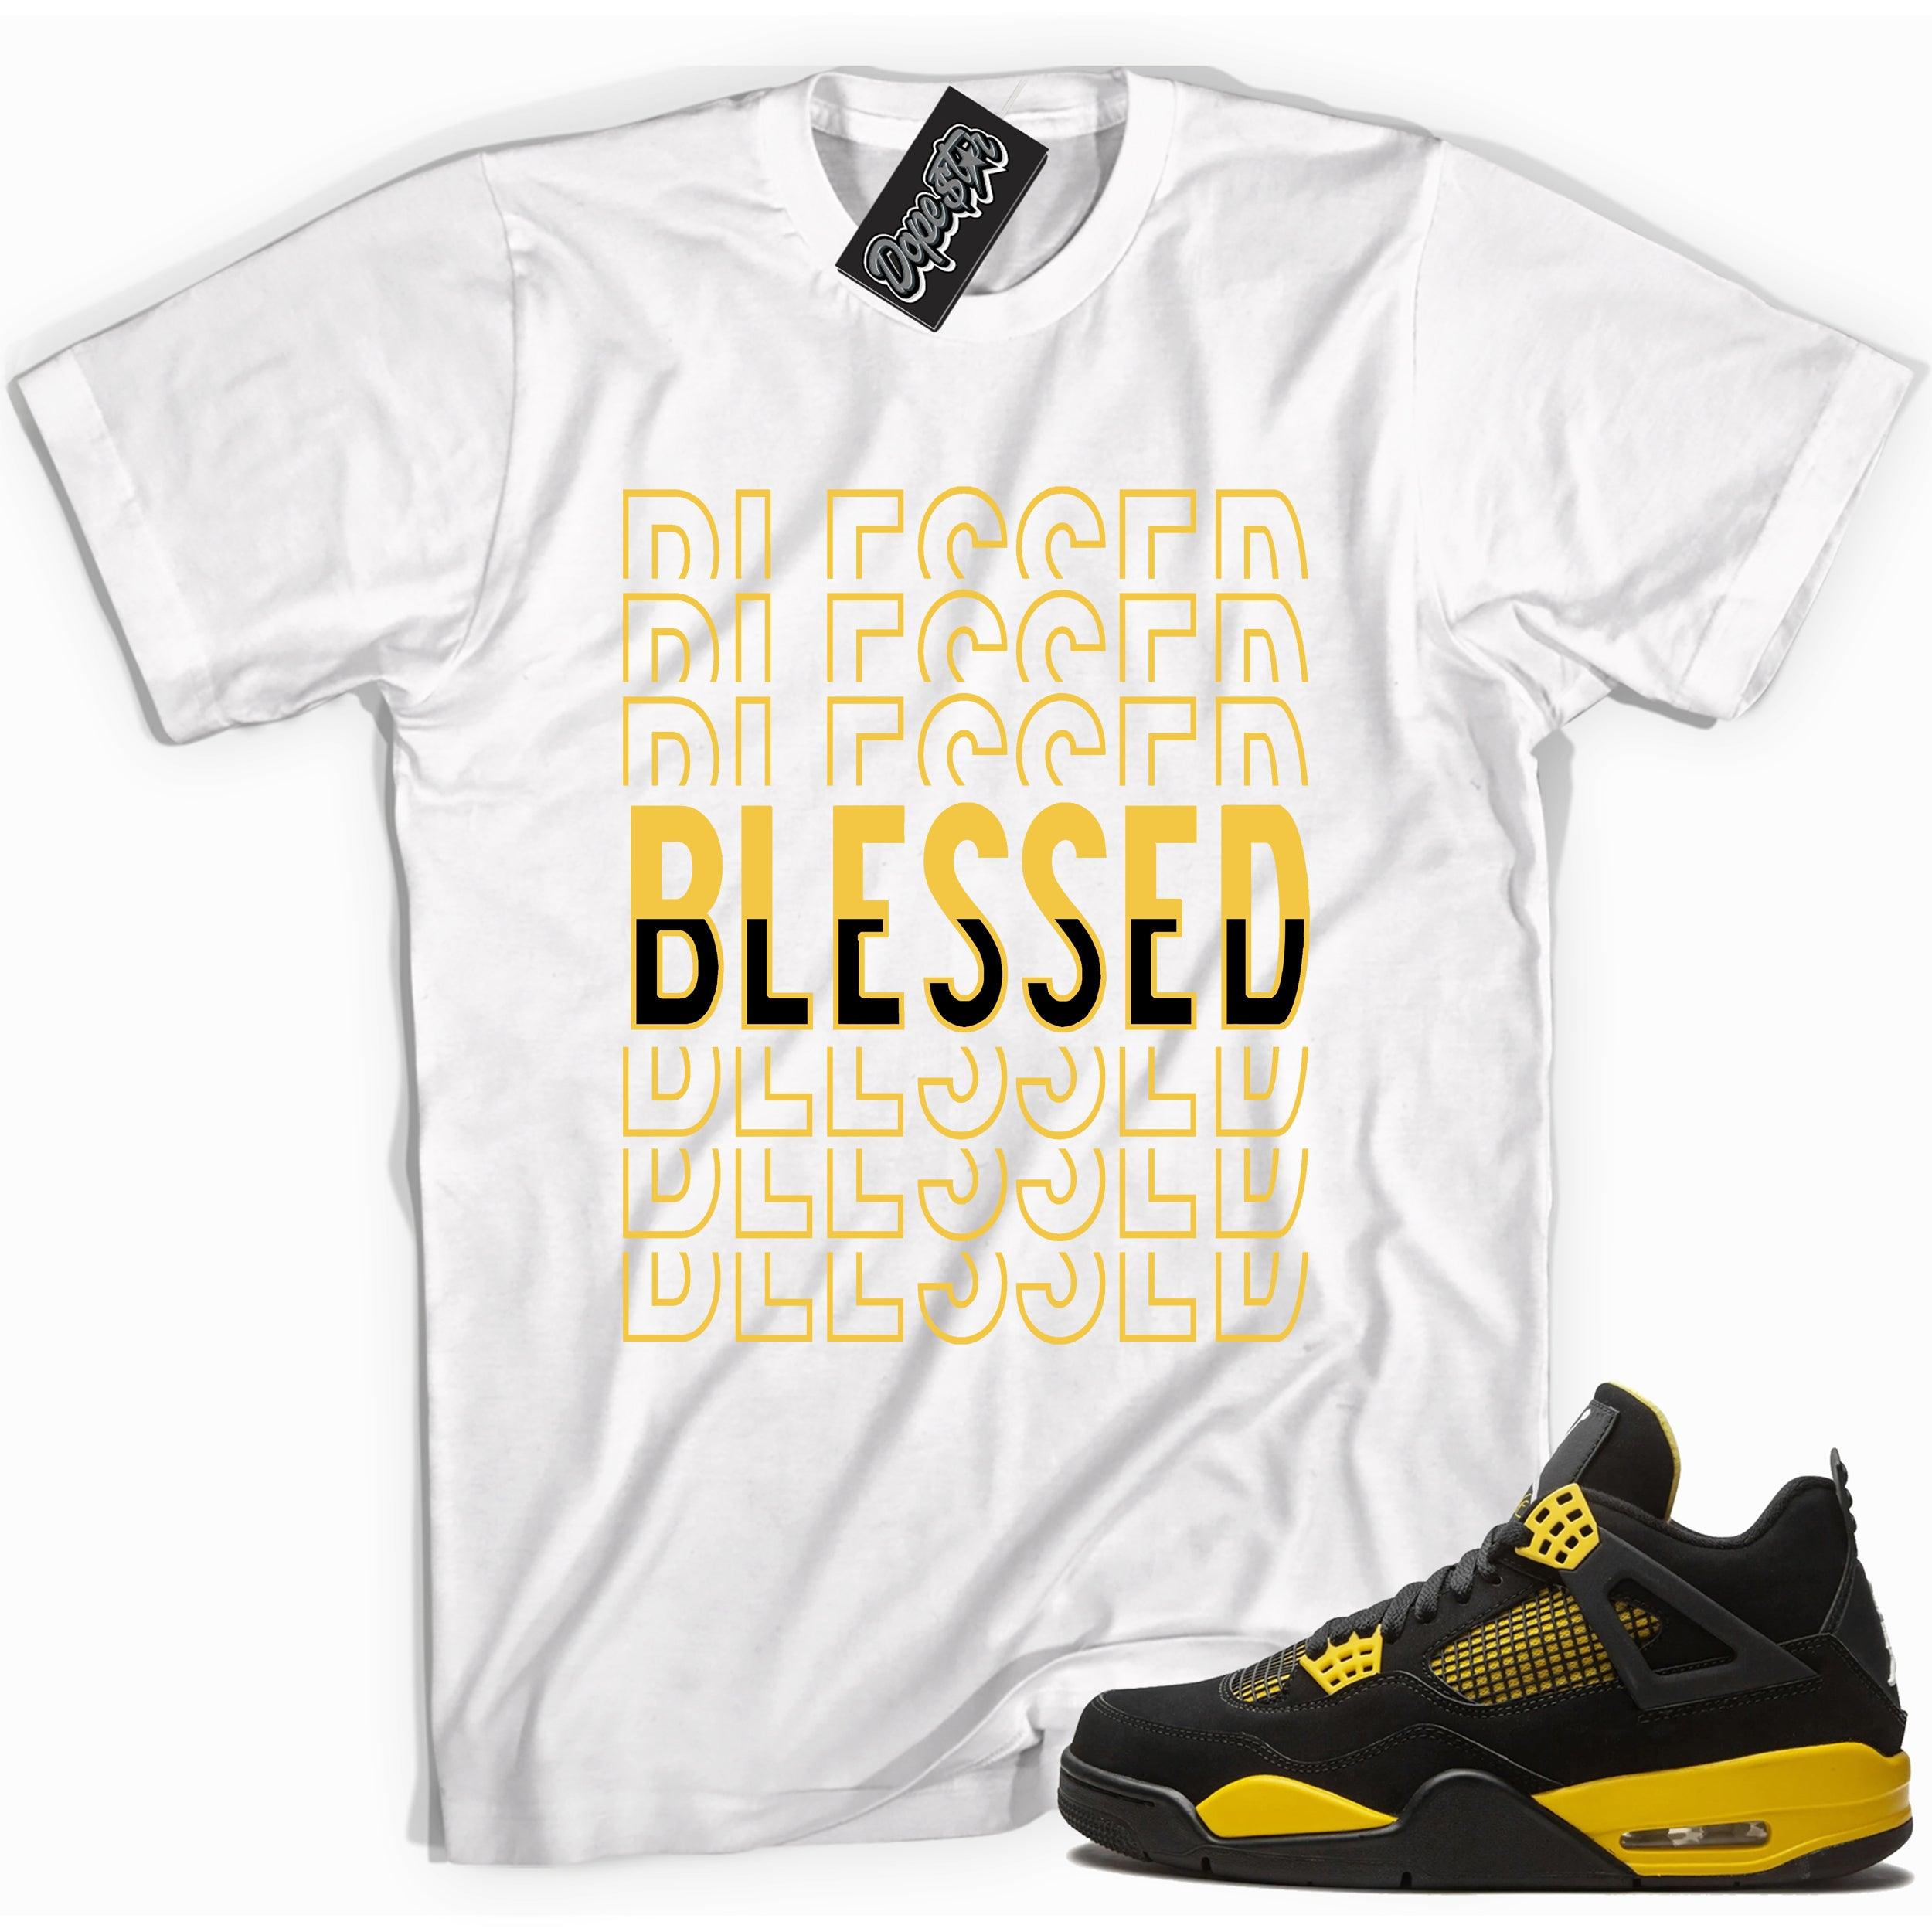 Cool white graphic tee with 'blessed' print, that perfectly matches Air Jordan 4 Thunder sneakers